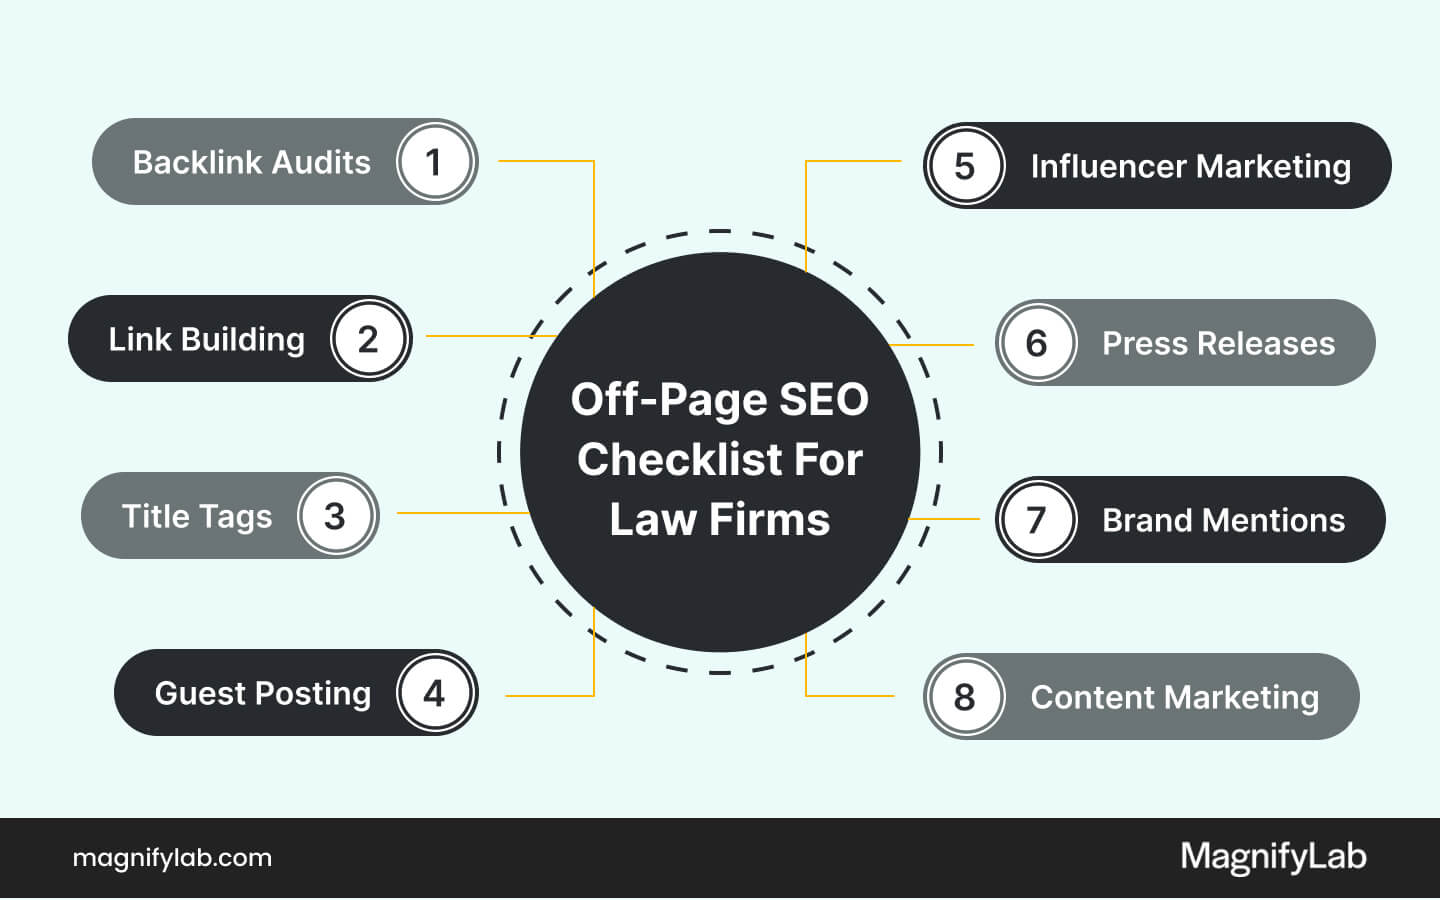 A creative illustration of the 8 key off-page ranking factors essential for lawyer SEO marketing, providing a visual roadmap for law firms looking to enhance their search engine rankings through strategies beyond their website. Displayed in a clear and organised manner, through icons and colour codes, each factor - backlink quality and quantity, social media presence, brand mentions, client reviews, guest blogging, influencer partnerships, local listings, and forum participation - is detailed with succinct explanations or symbols that convey its relevance to SEO. The graphic emphasises the interconnectedness of these factors and their collective impact on a law firm's online authority and visibility. By focusing on these off-page elements, the image underscores the importance of building a strong, credible presence across various digital platforms to support and amplify lawyer SEO marketing efforts.